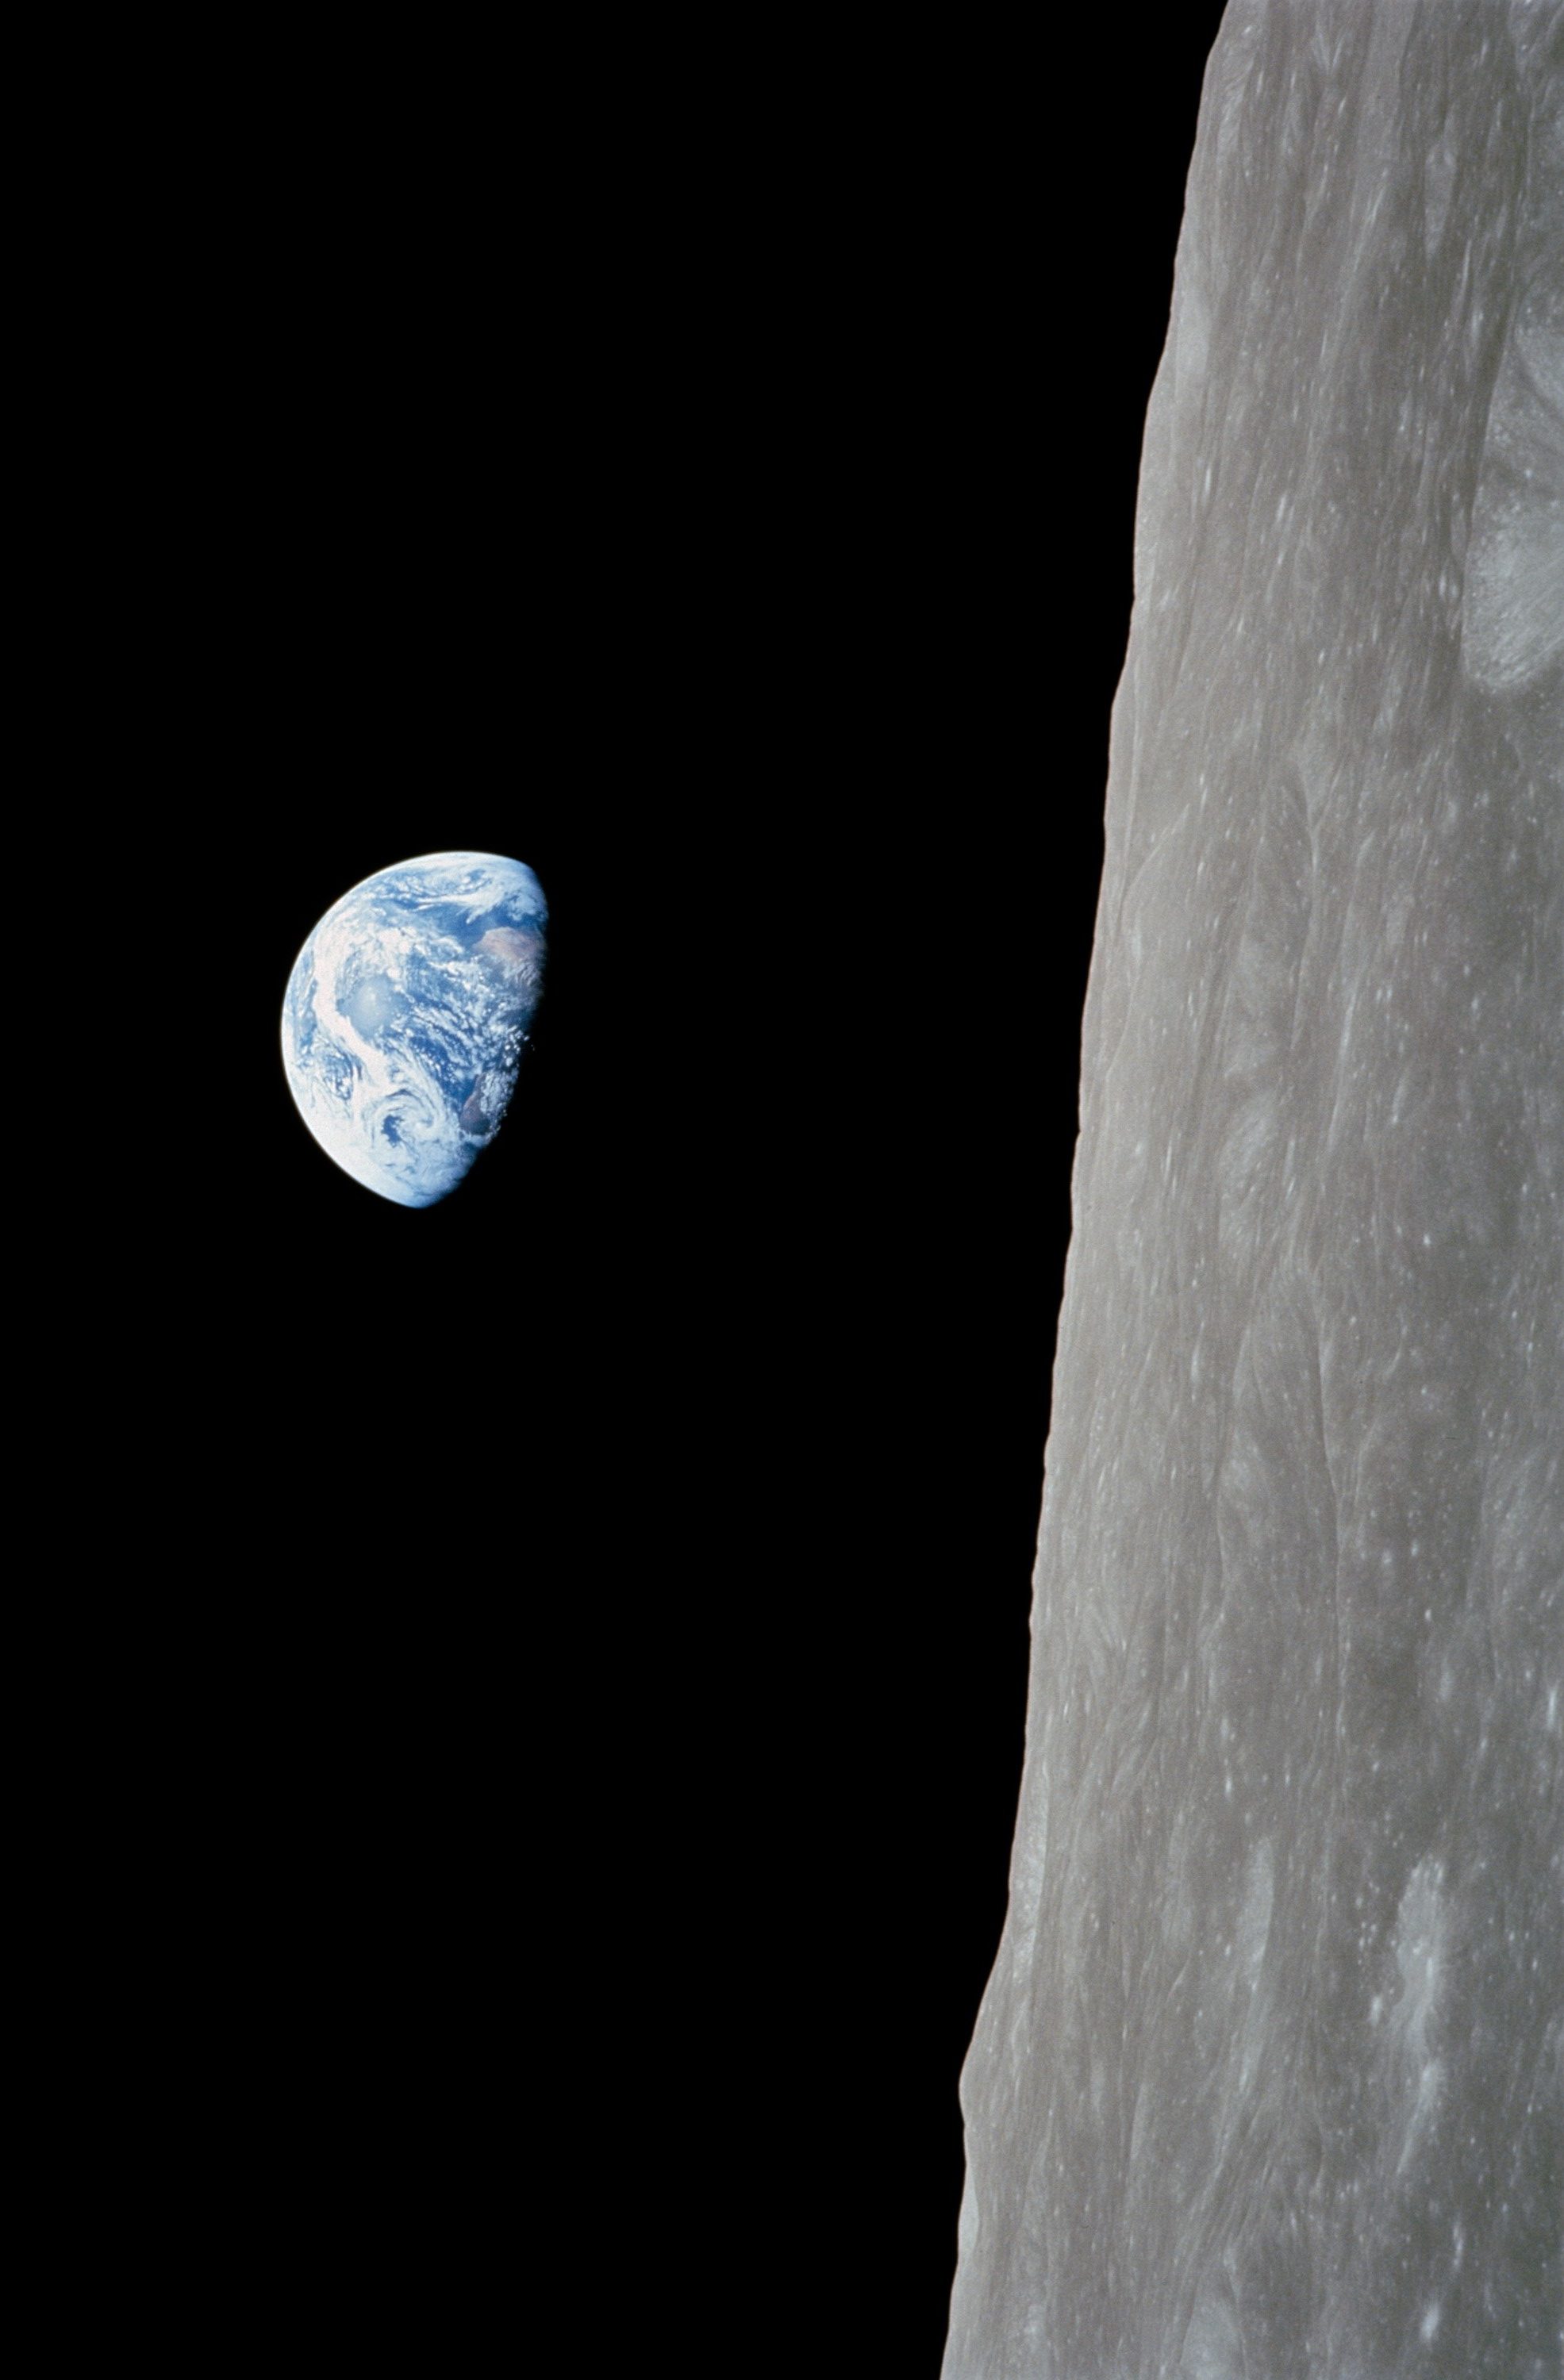 The famous Earthrise photograph taken during the Apollo 8 crew’s first orbit around the Moon in 1968